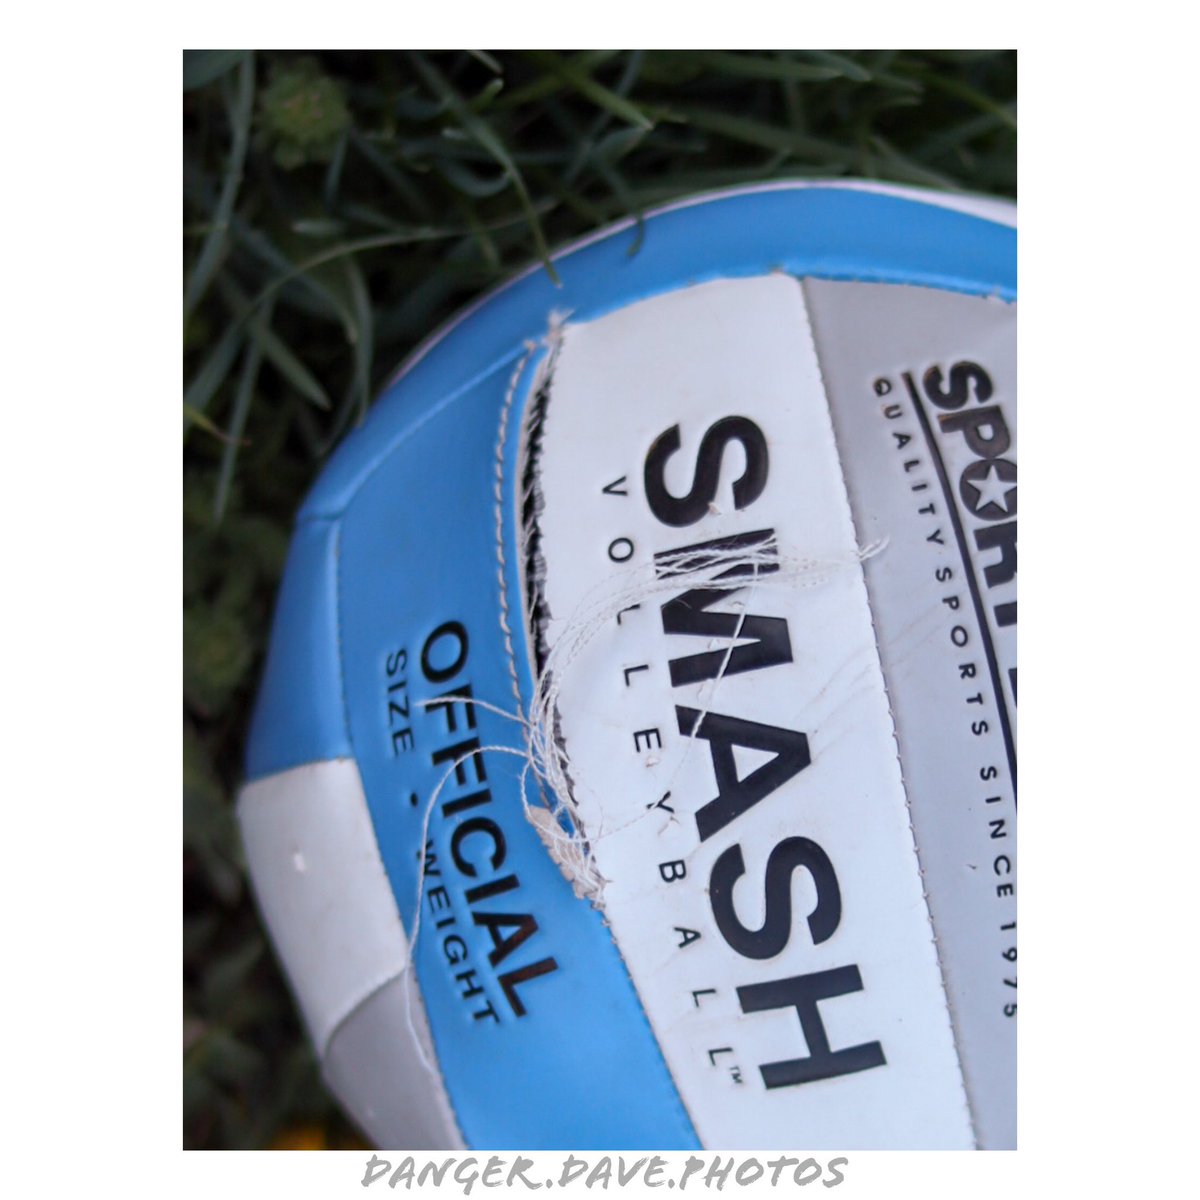 Smash! 💥 RIP
📸 🏐 ❤️

#volleyball #photography #50mmphotography #volleyballlife #sportsphotos  #junctioncityks #outdoors